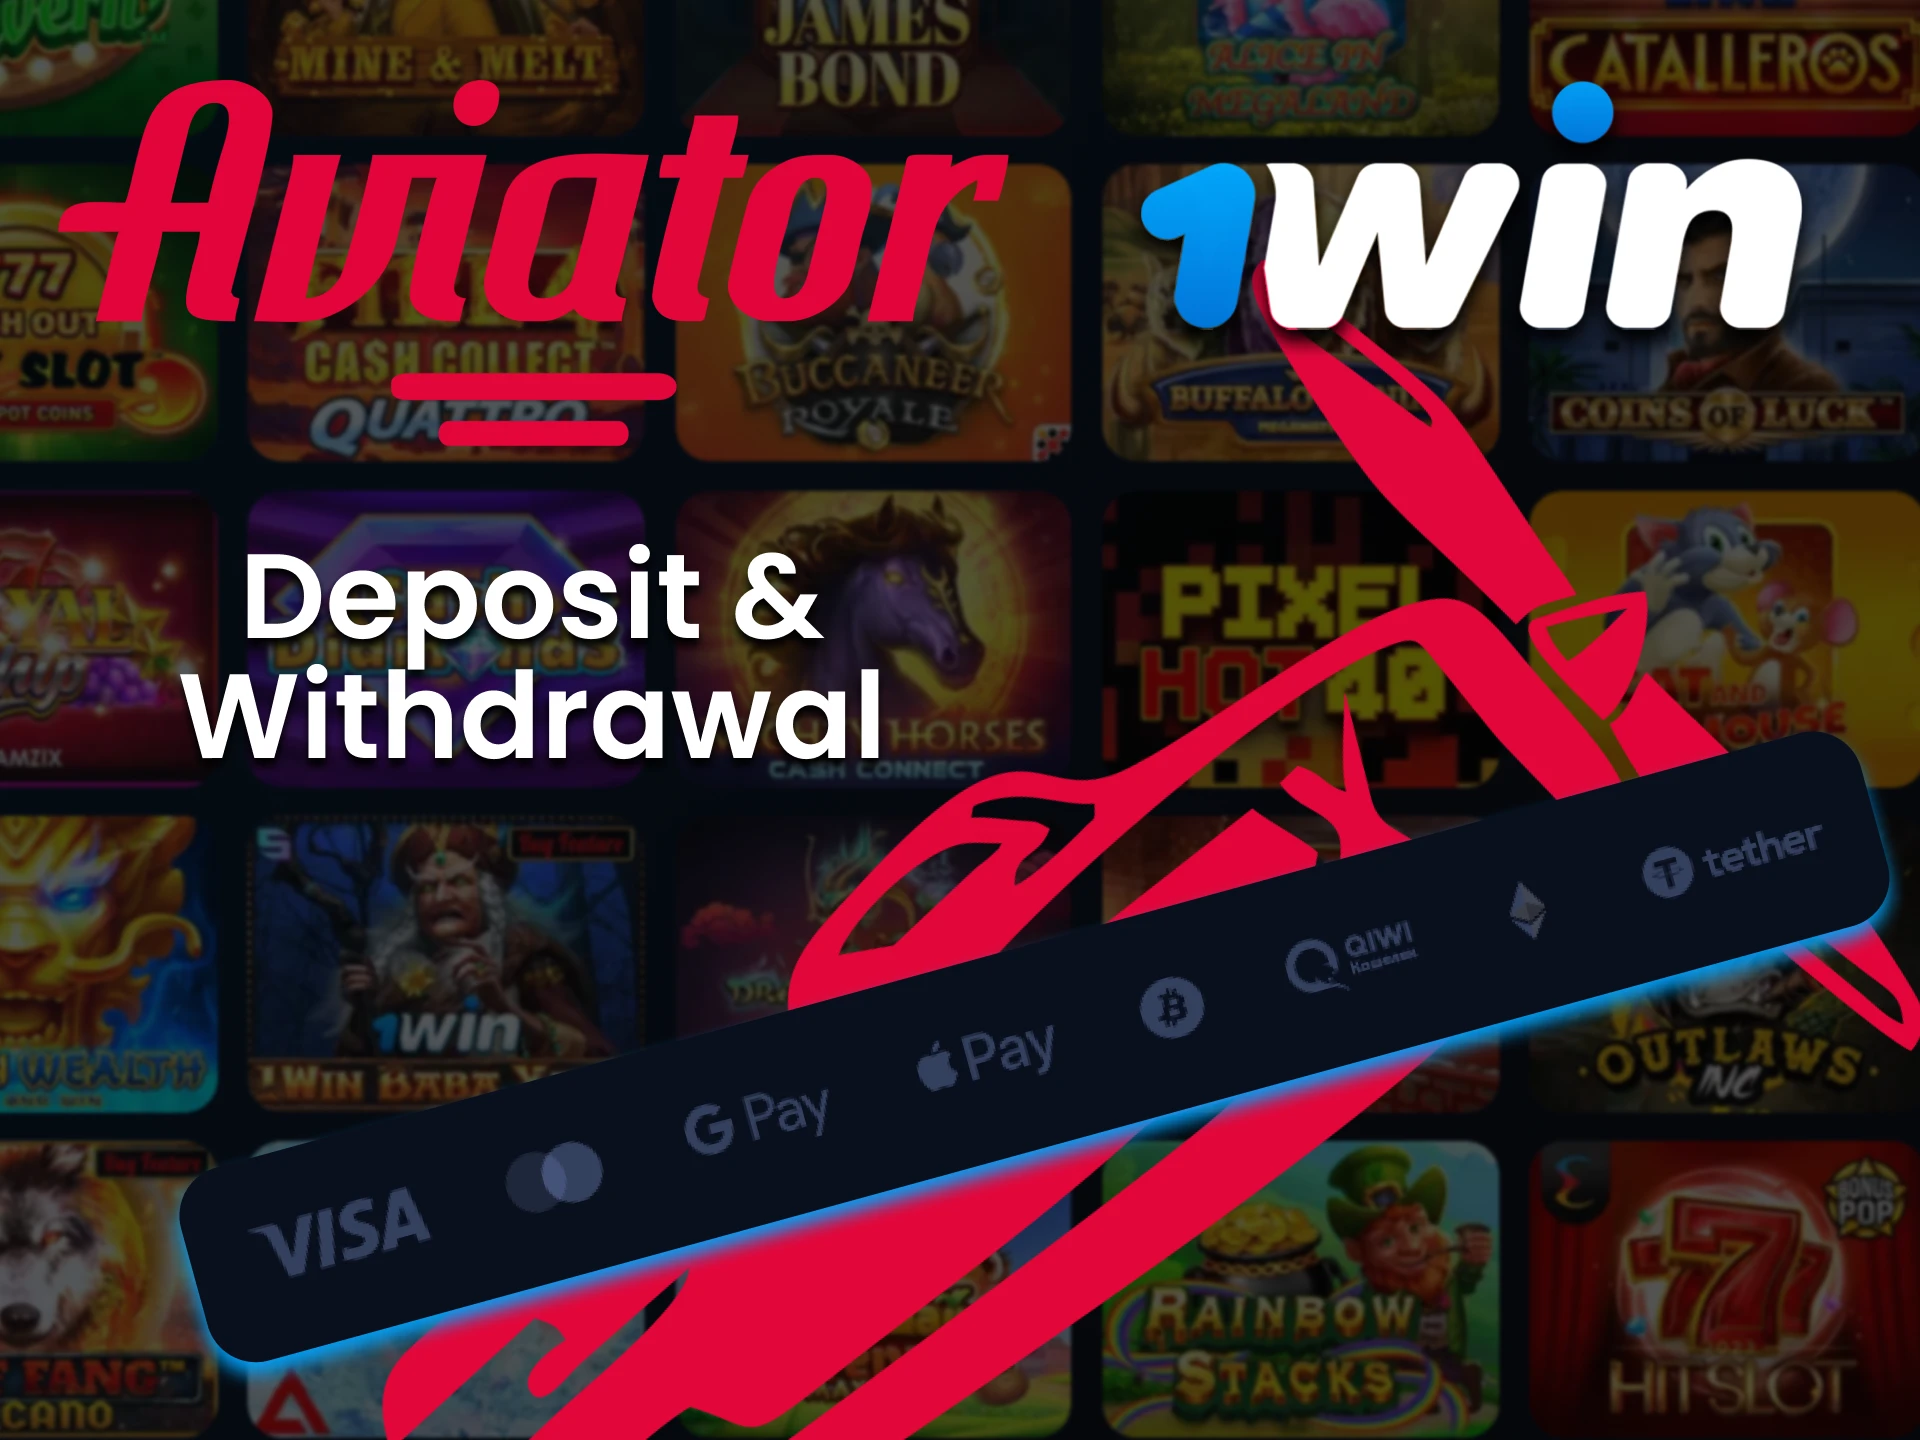 Deposit and withdraw funds in the game Aviator at 1win.